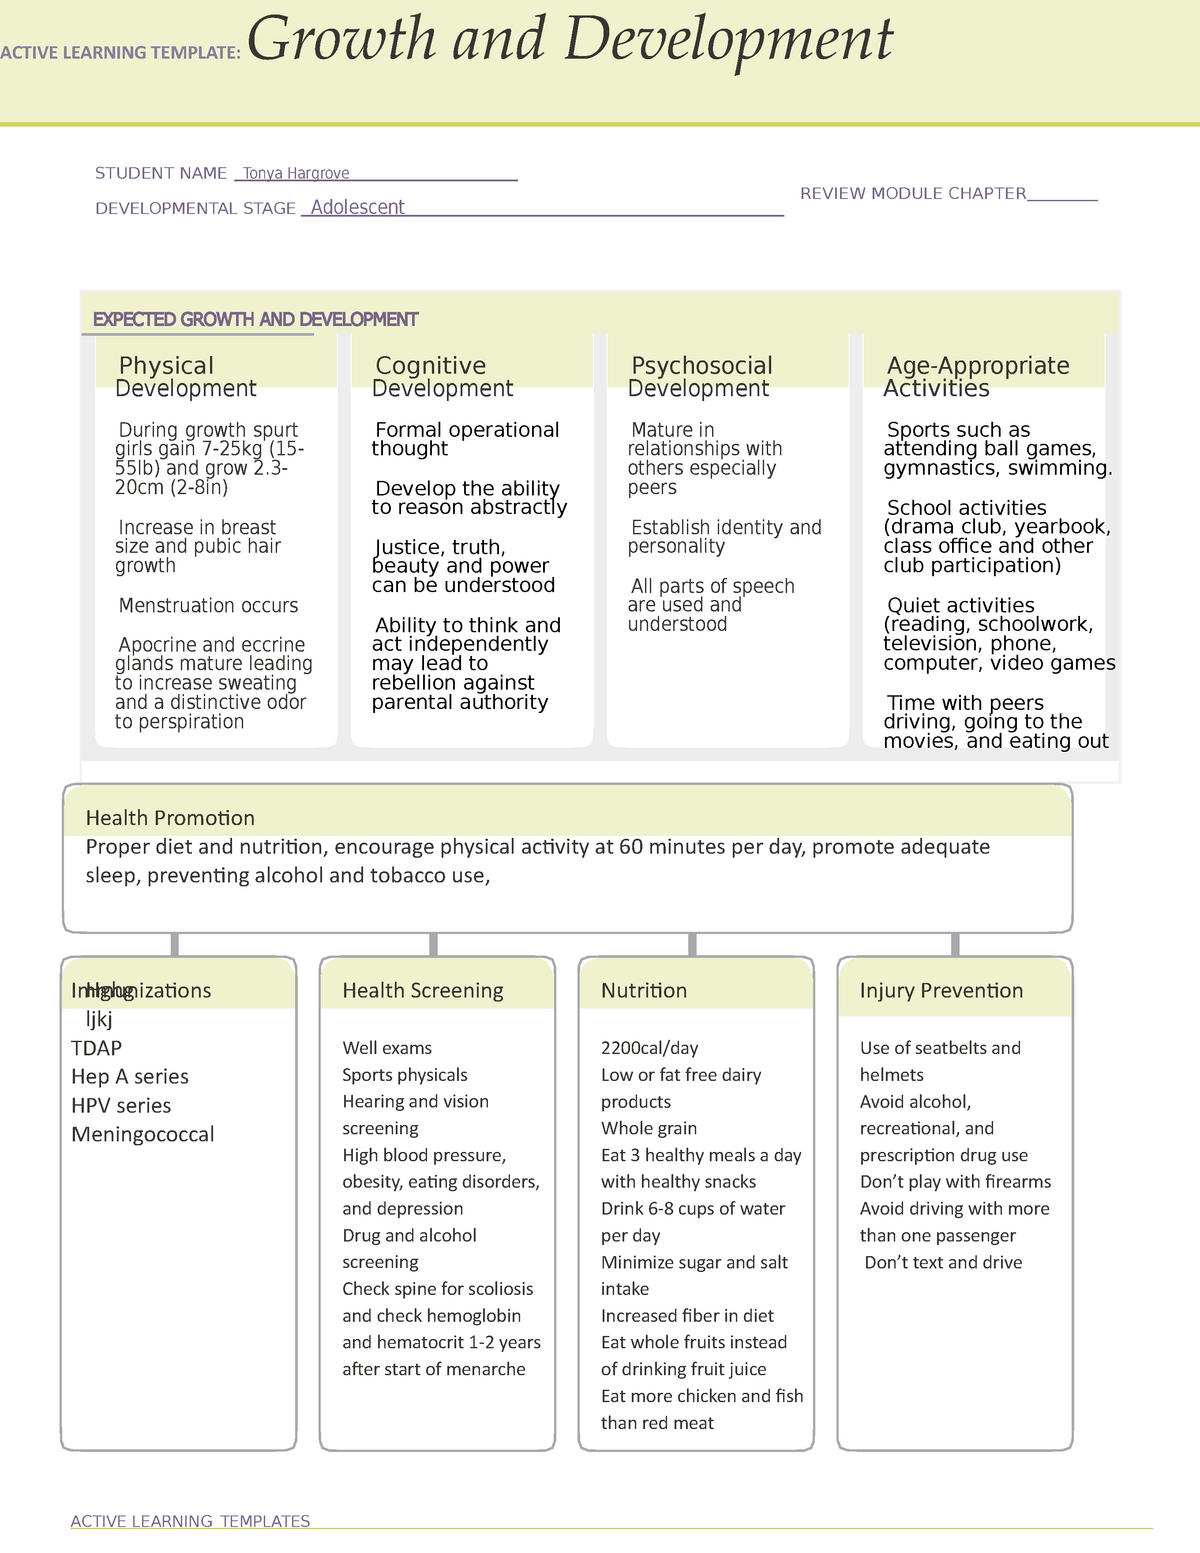 Growth & Development Adolescent ACTIVE LEARNING TEMPLATE Growth and